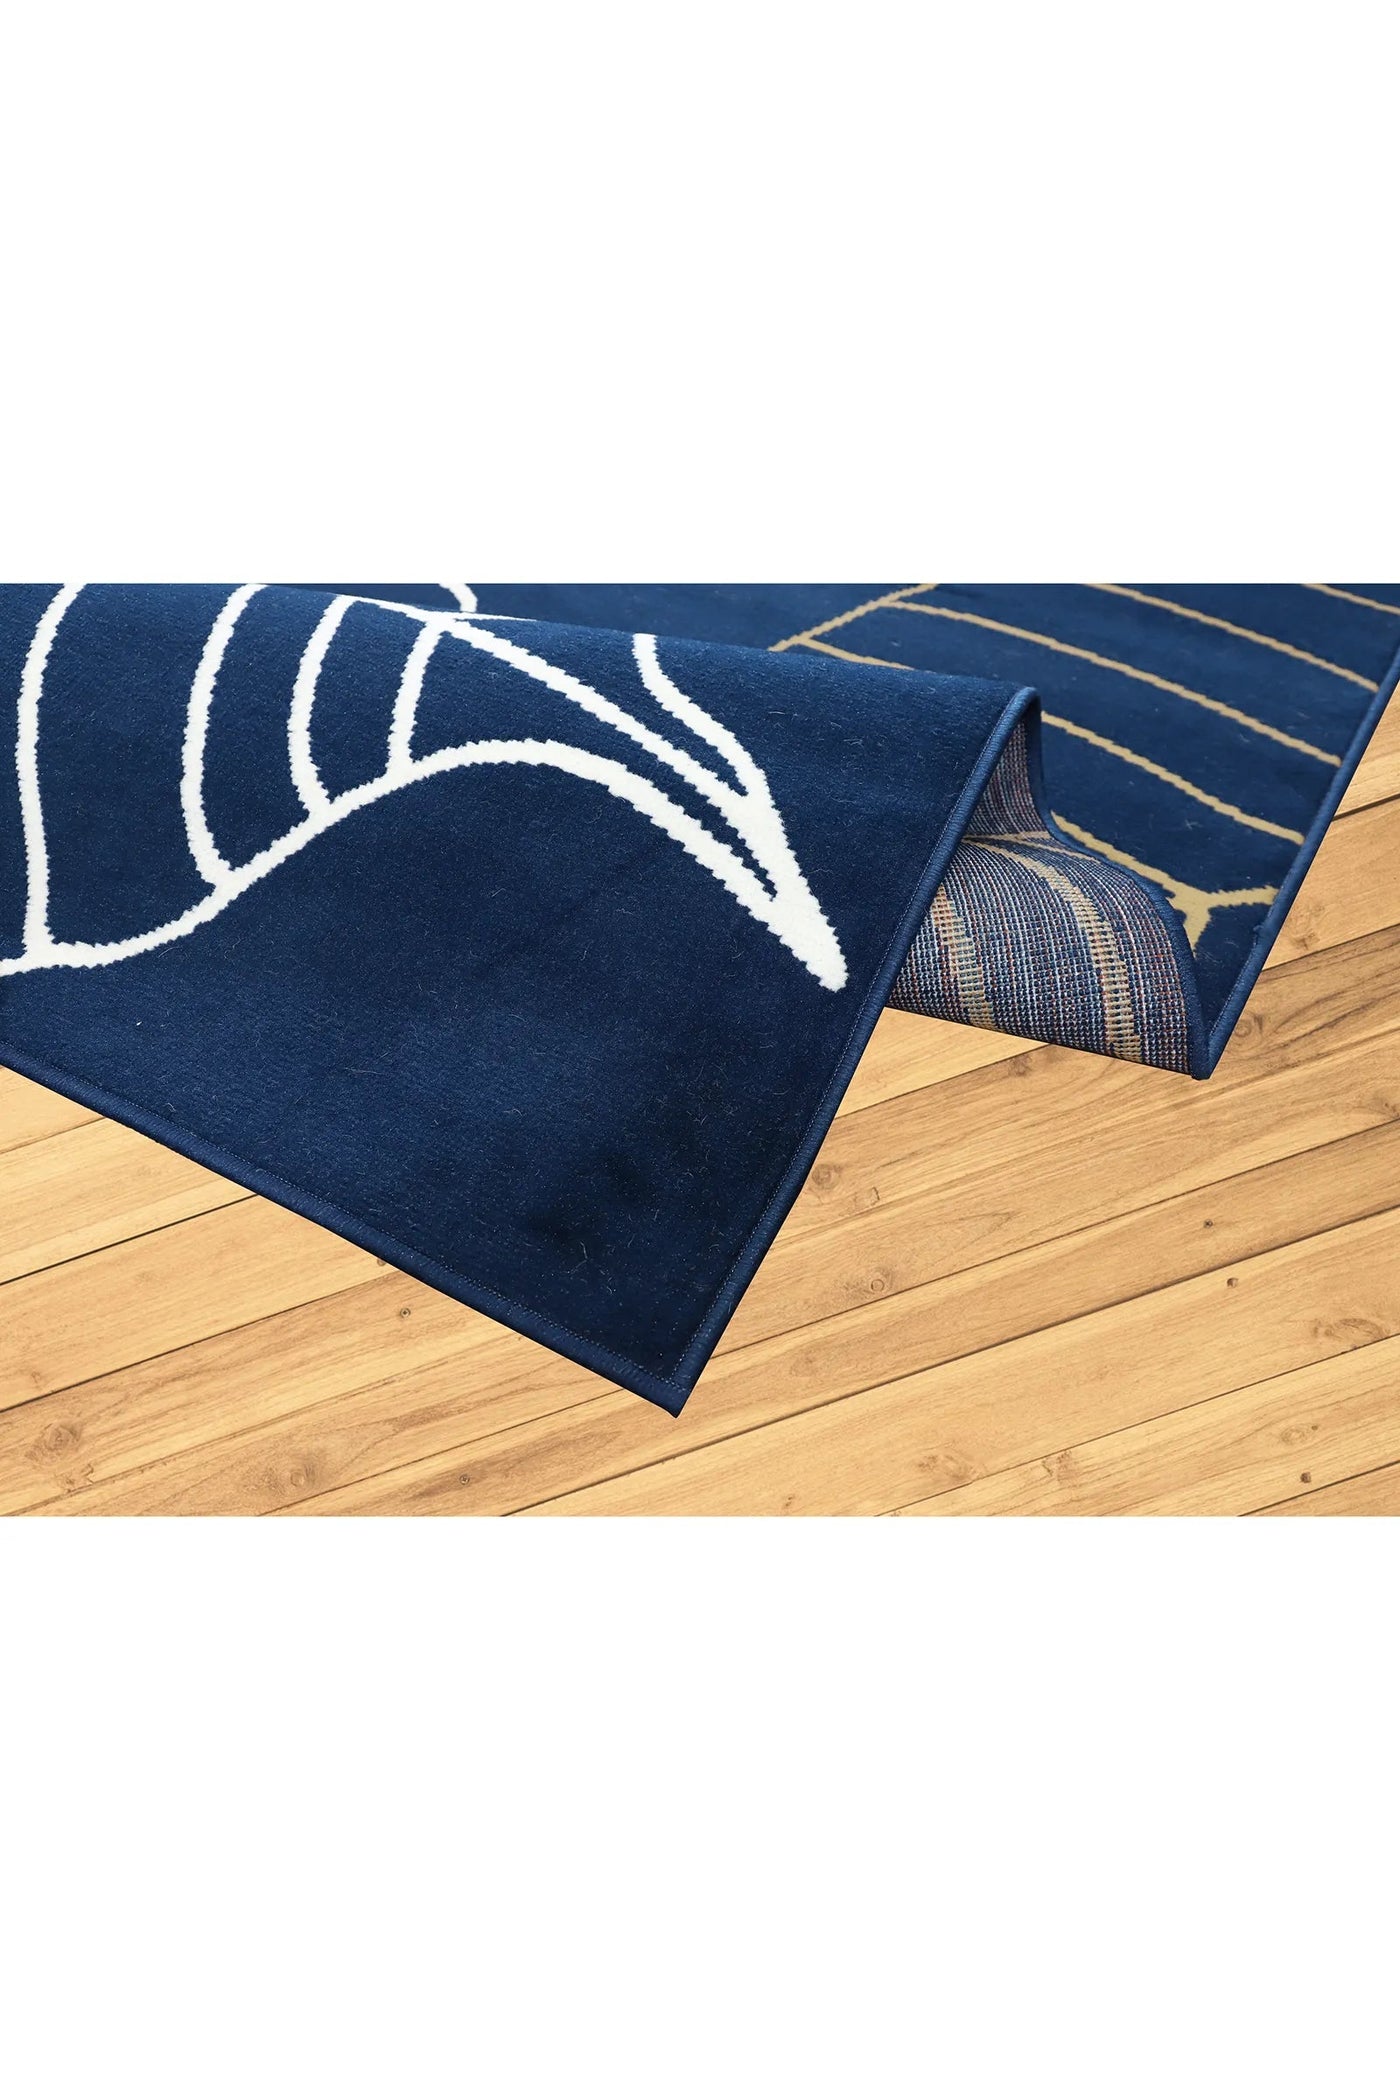 Gino Floral Rug - 108 Blue